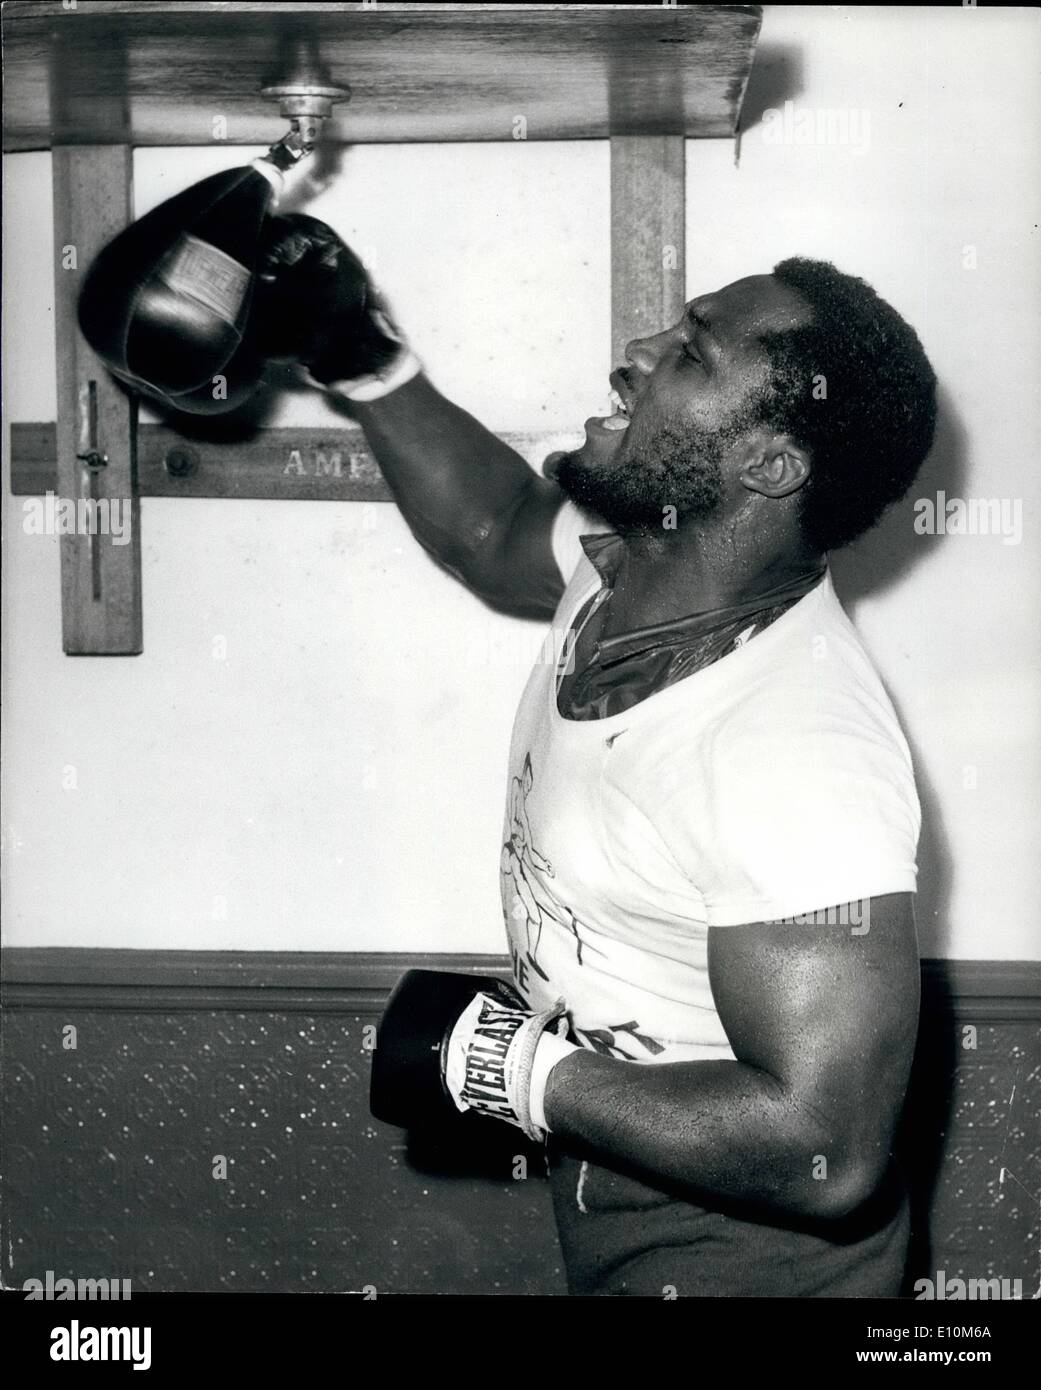 Jun. 06, 1973 - Joe Frazier has a work-out in preparation for his fight with Britain's Joe Bugner: Photo shows Joe Frazier, the Stock Photo